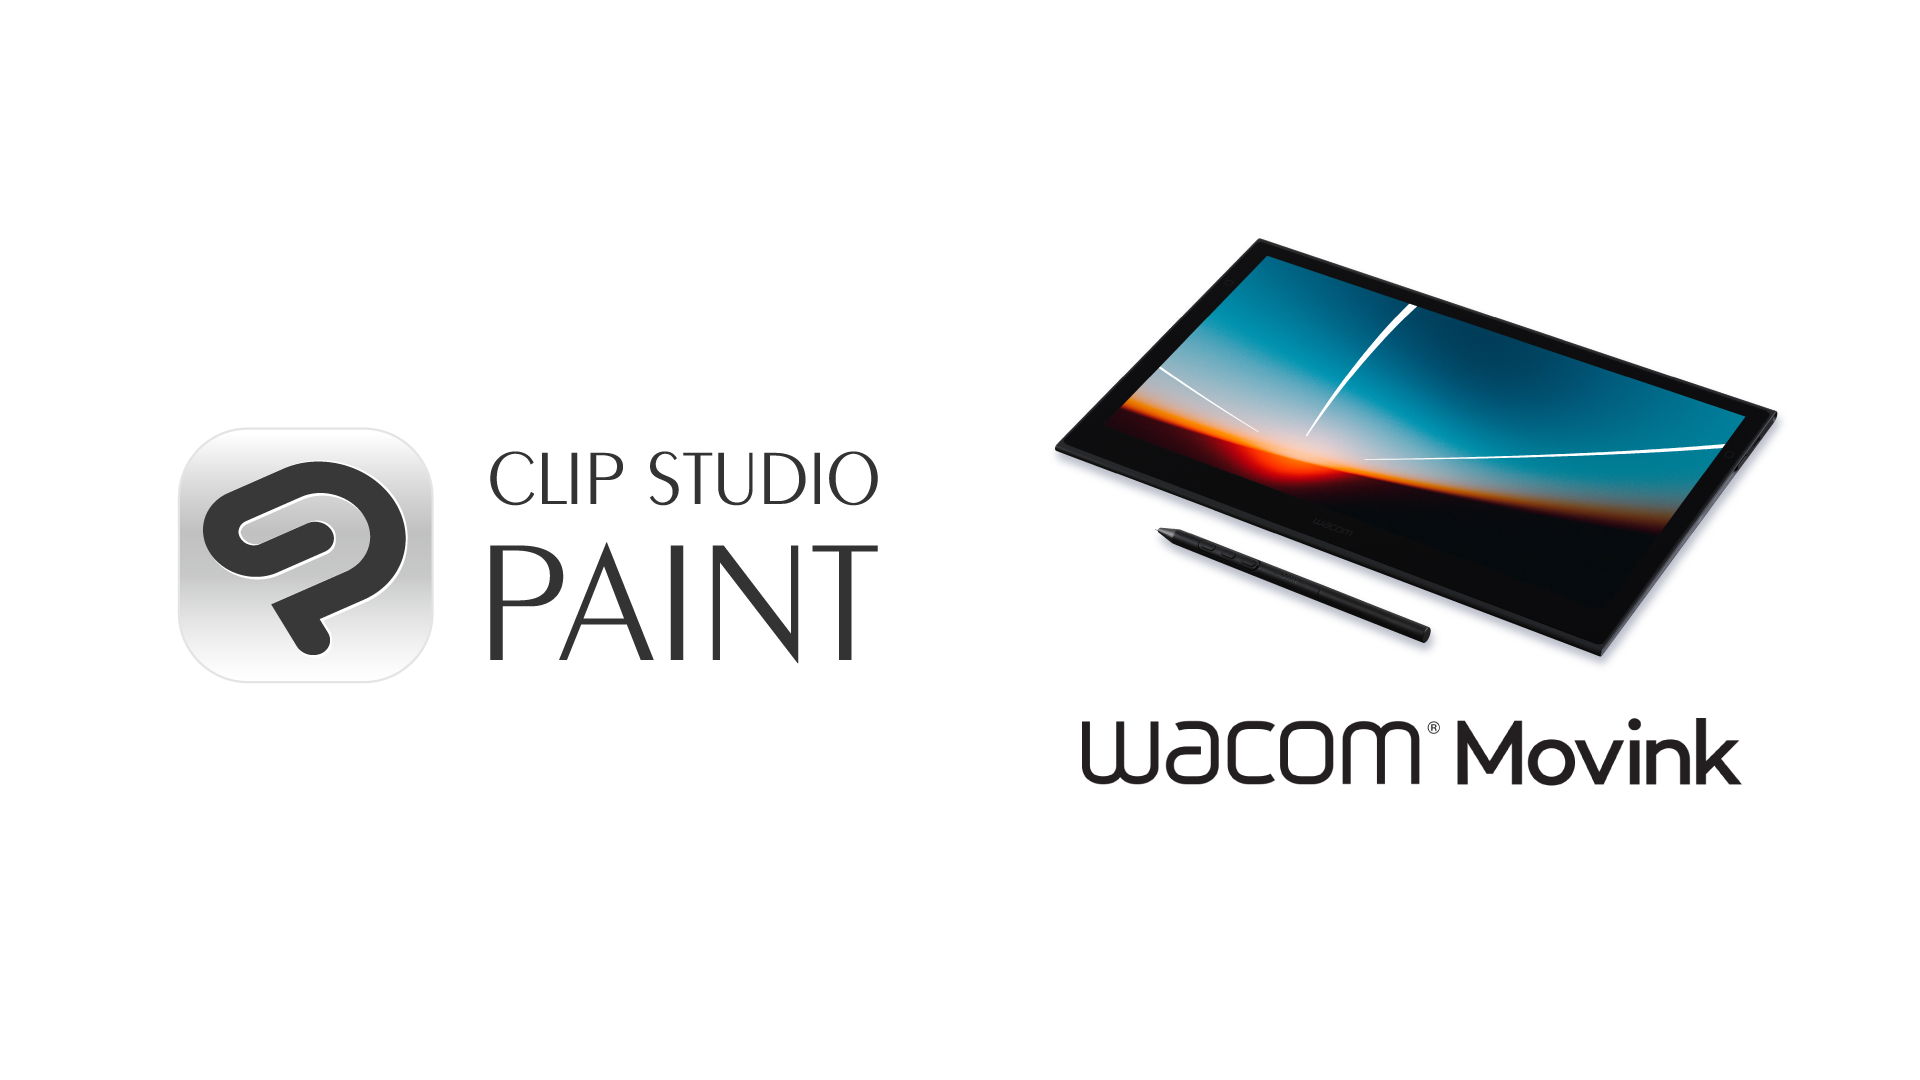 Clip Studio Paint bundled with Wacom Movink 13, announced on April 24 Wacom&#039;s thinnest and lightest OLED display tablet to support professionals&#039; creative experiences